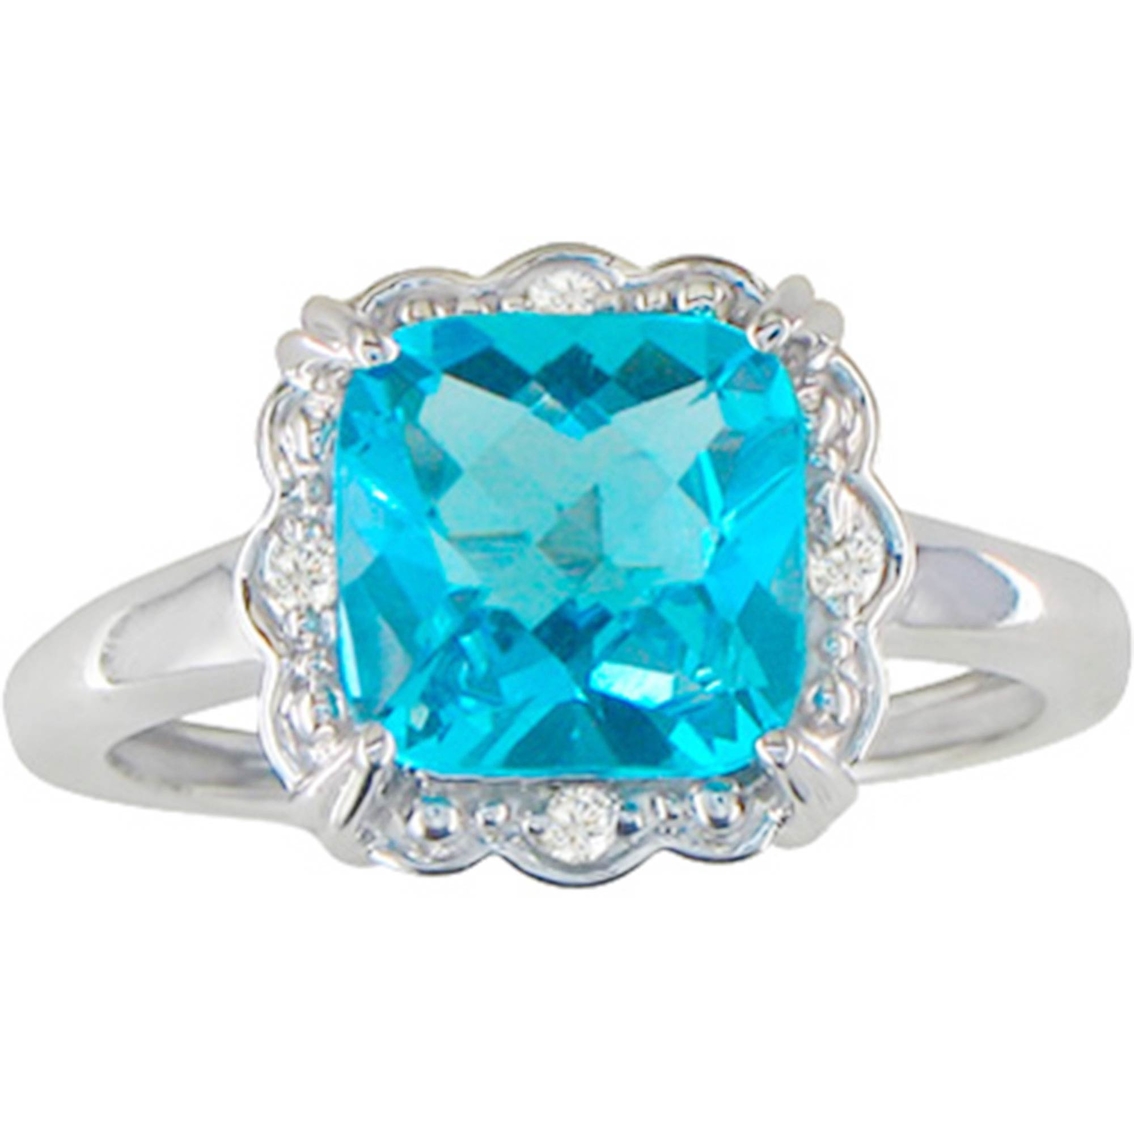 10K Gold Blue Topaz Ring with Diamond Accents